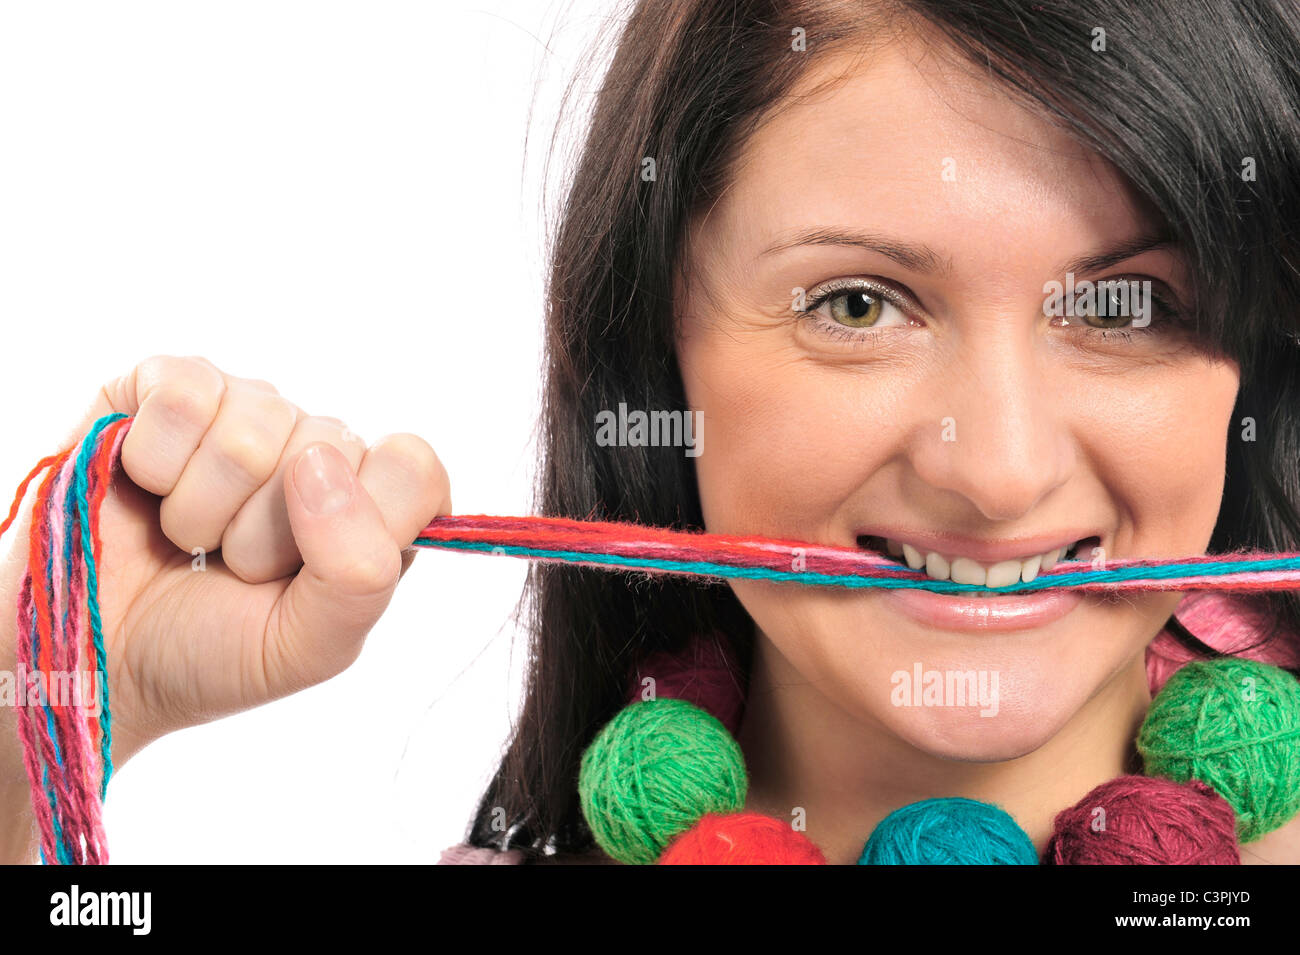 Portrait of a beautiful young girl with colored yarn in her mouth. Isolated white background. Stock Photo